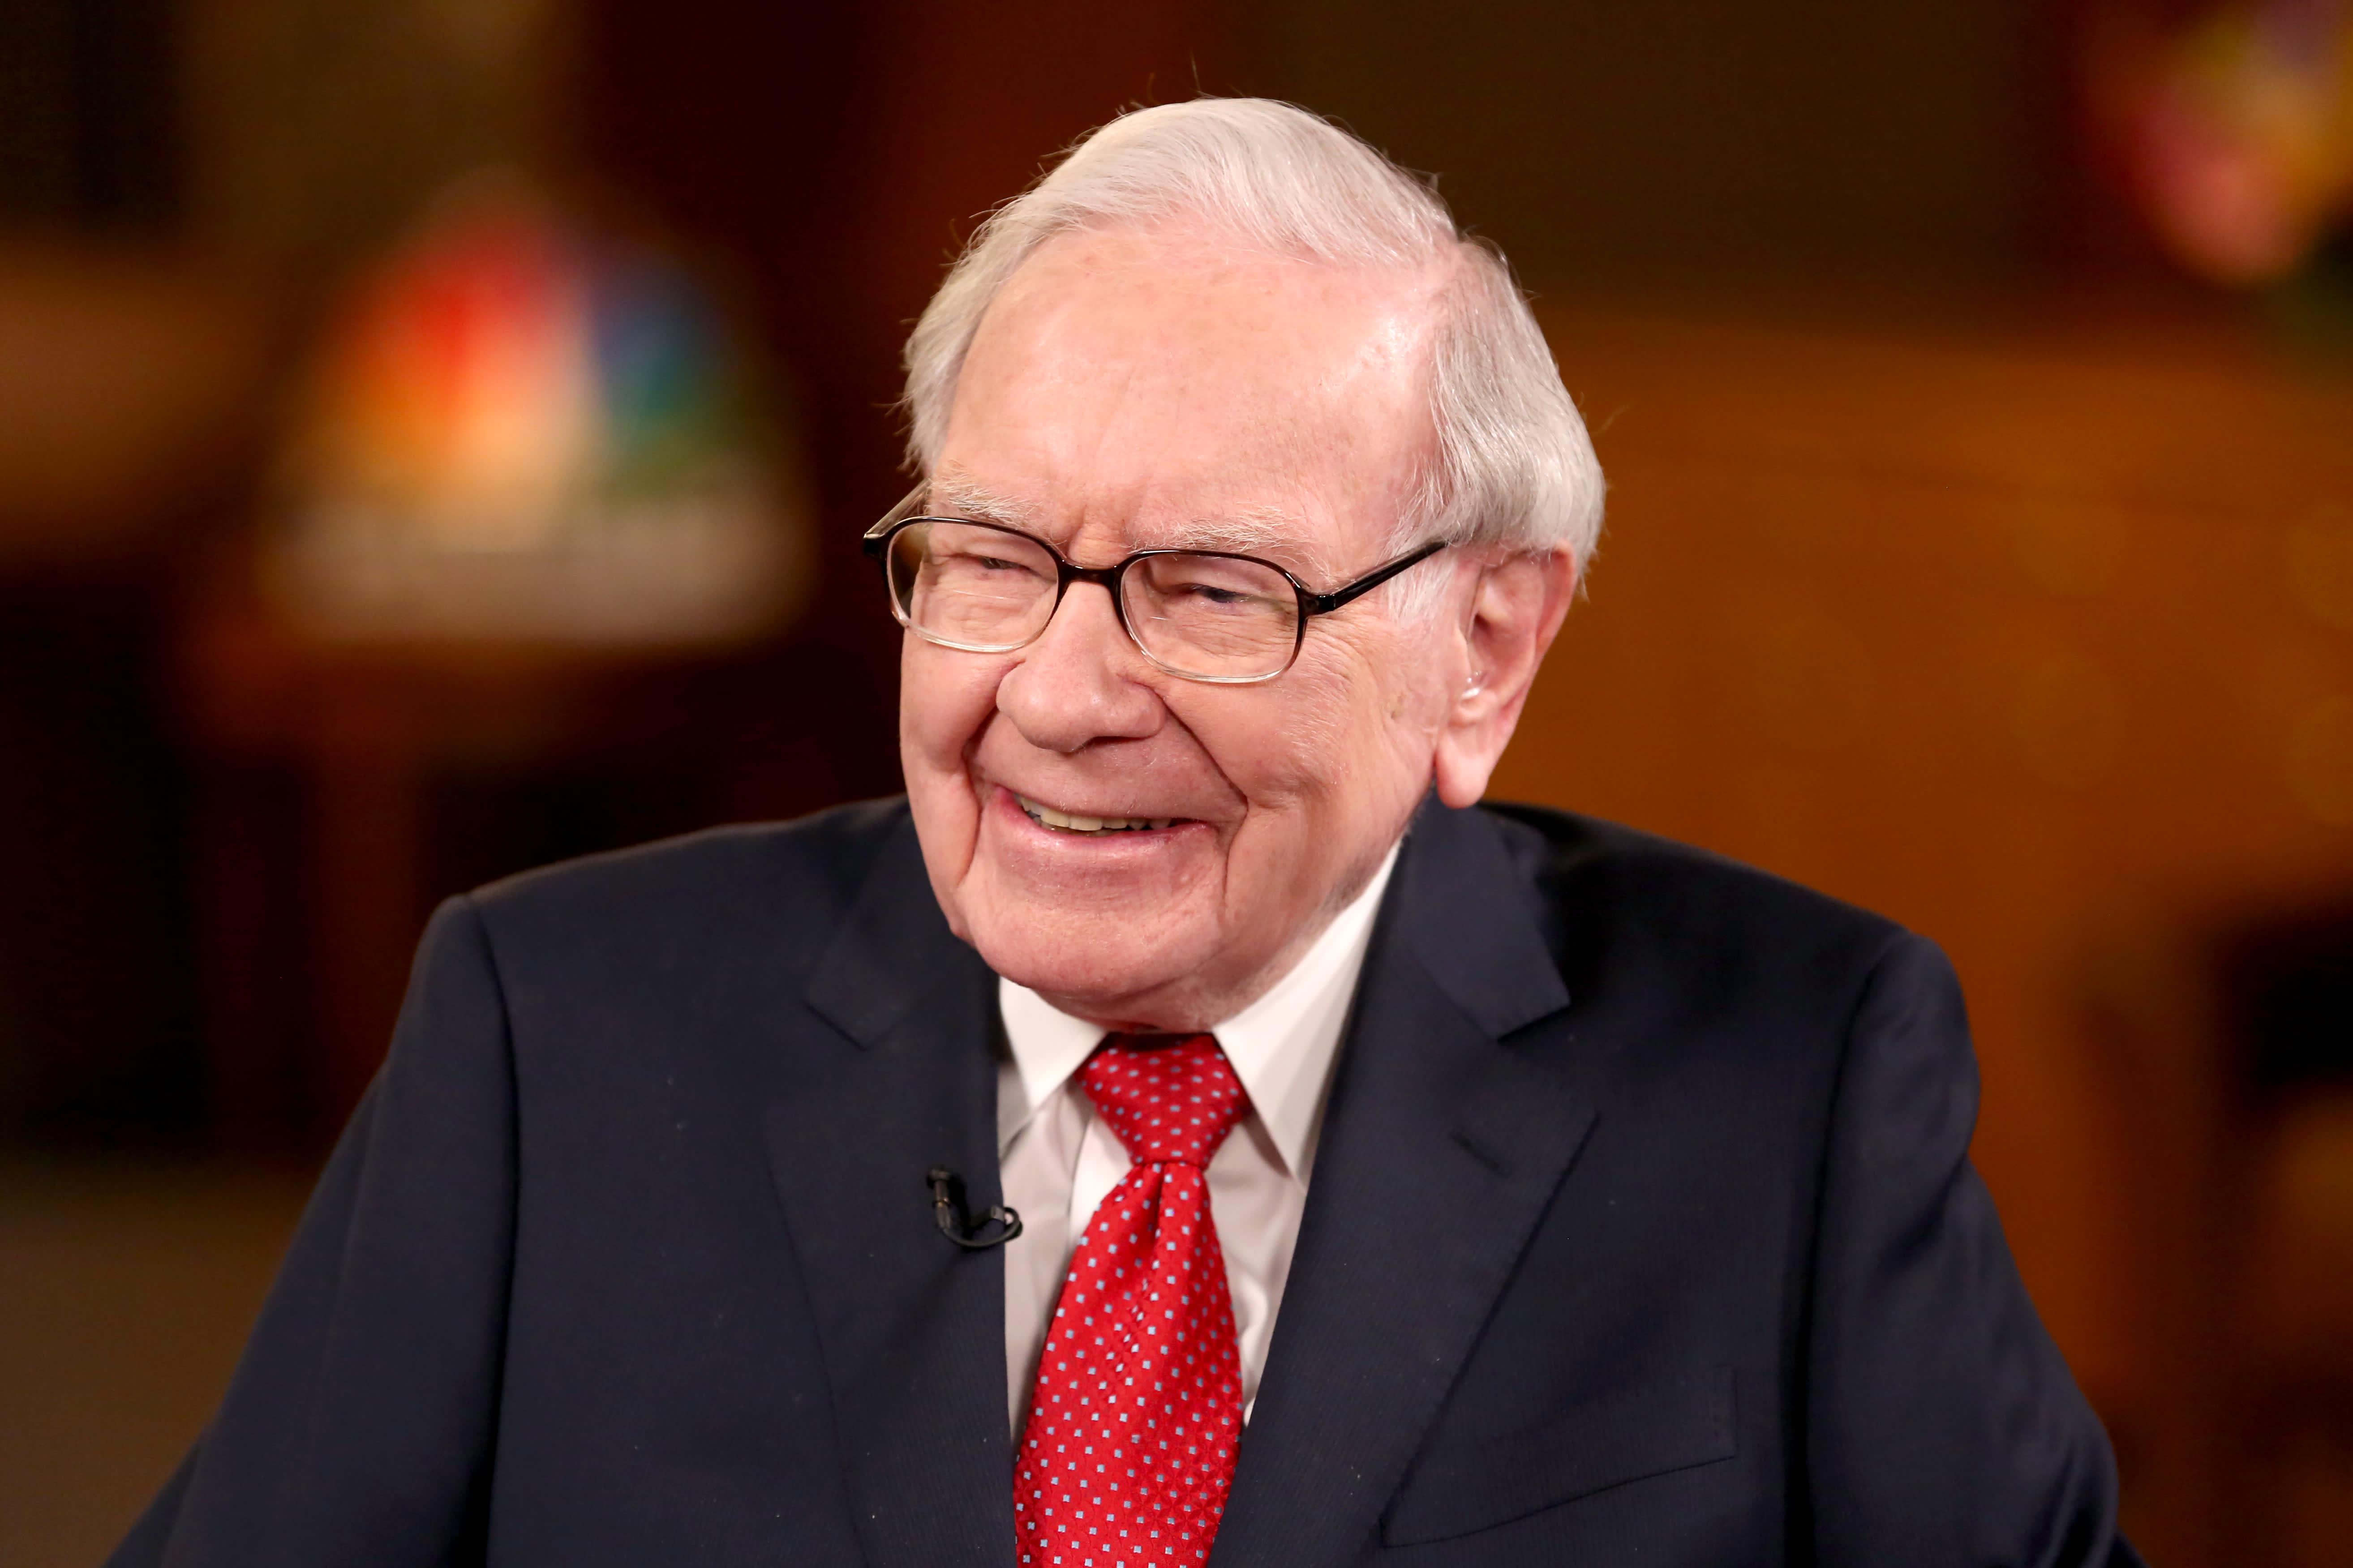 Warren Buffett’s net worth exceeds $ 100 billion for the first time, while shares in Berkshire set a record